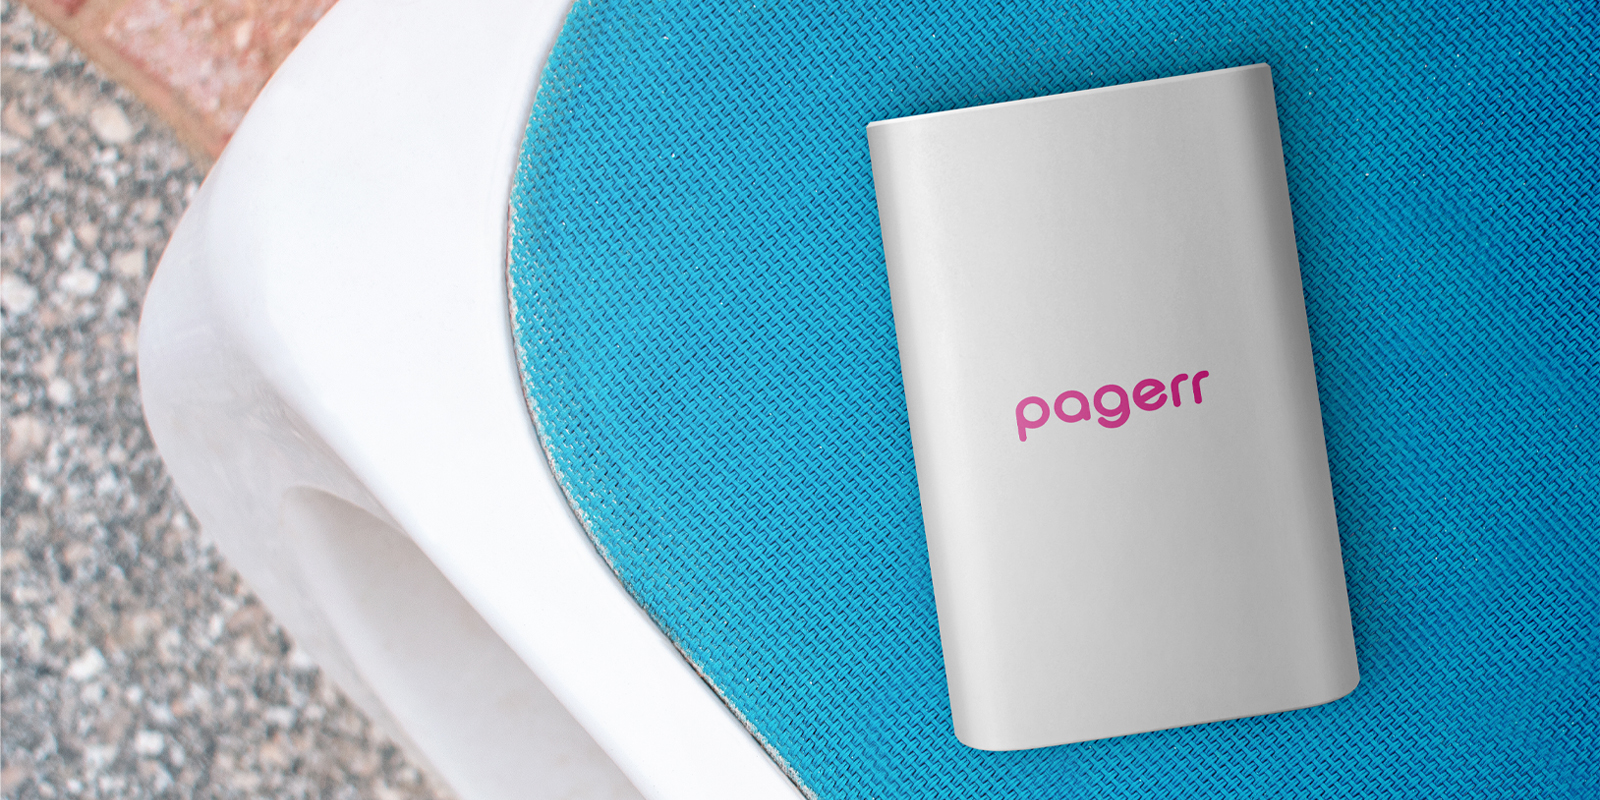 Chargers & power banks in Hamburg - Print with Pagerr